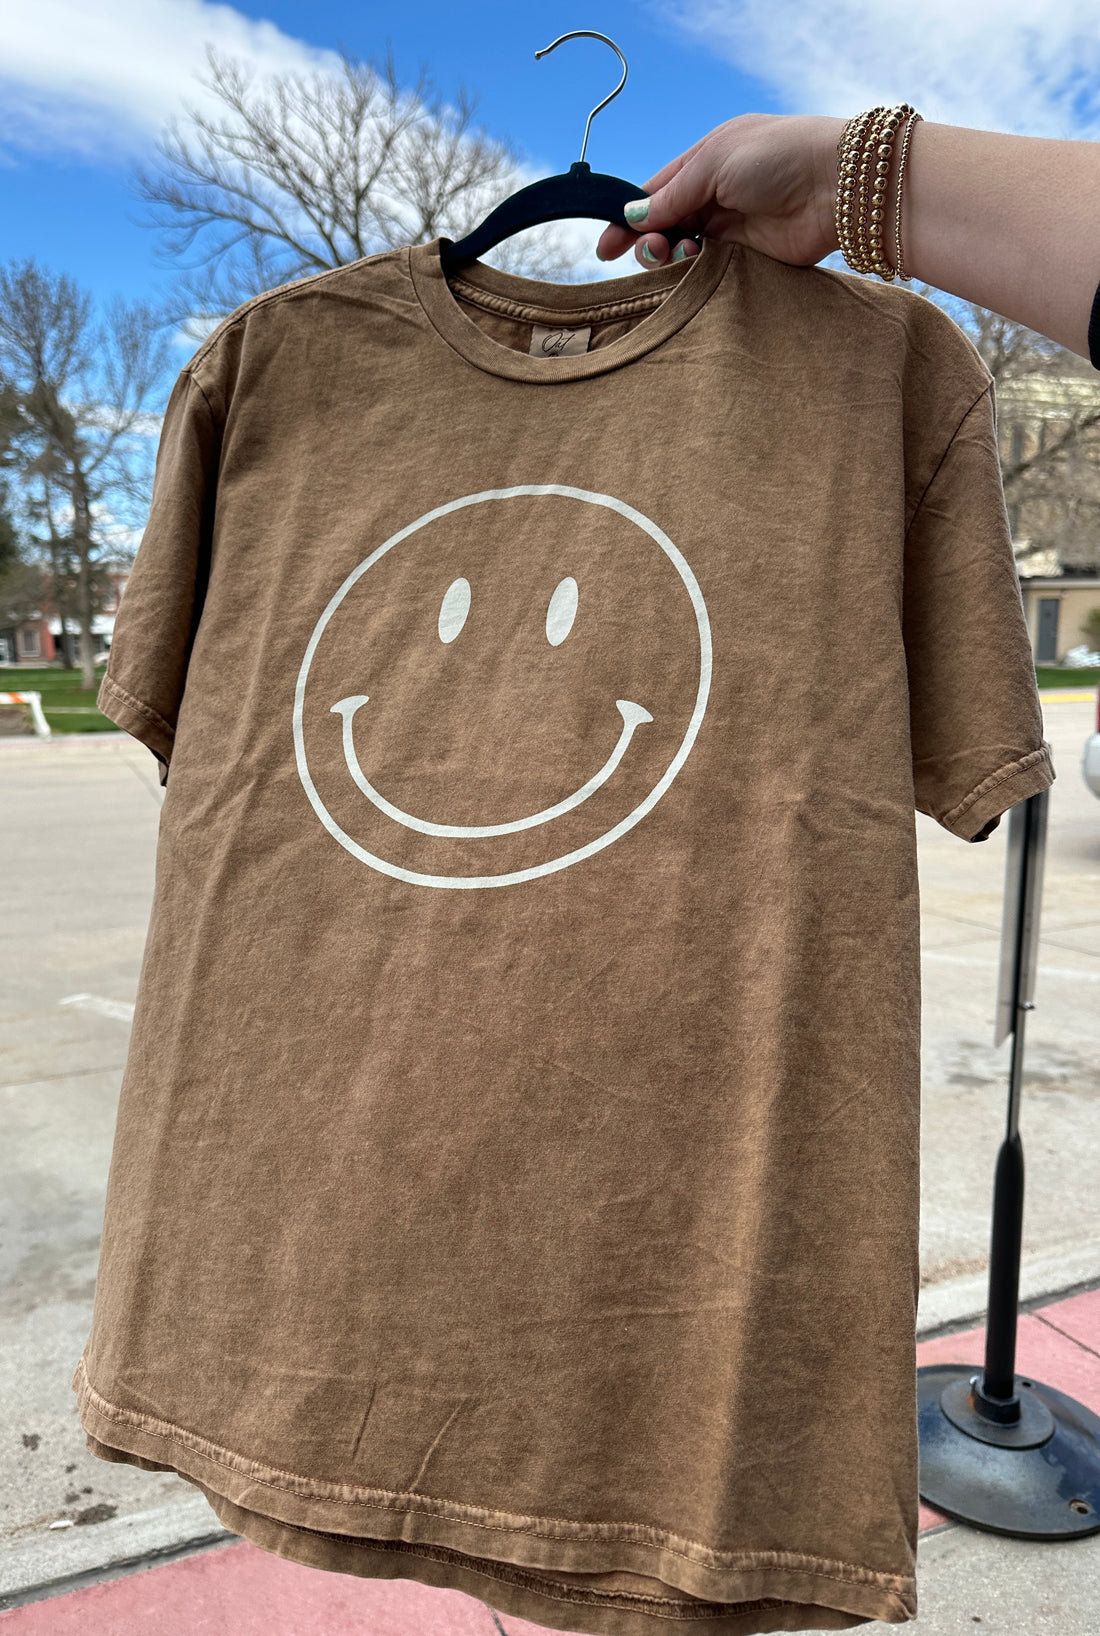 Smiley Mineral Graphic tee